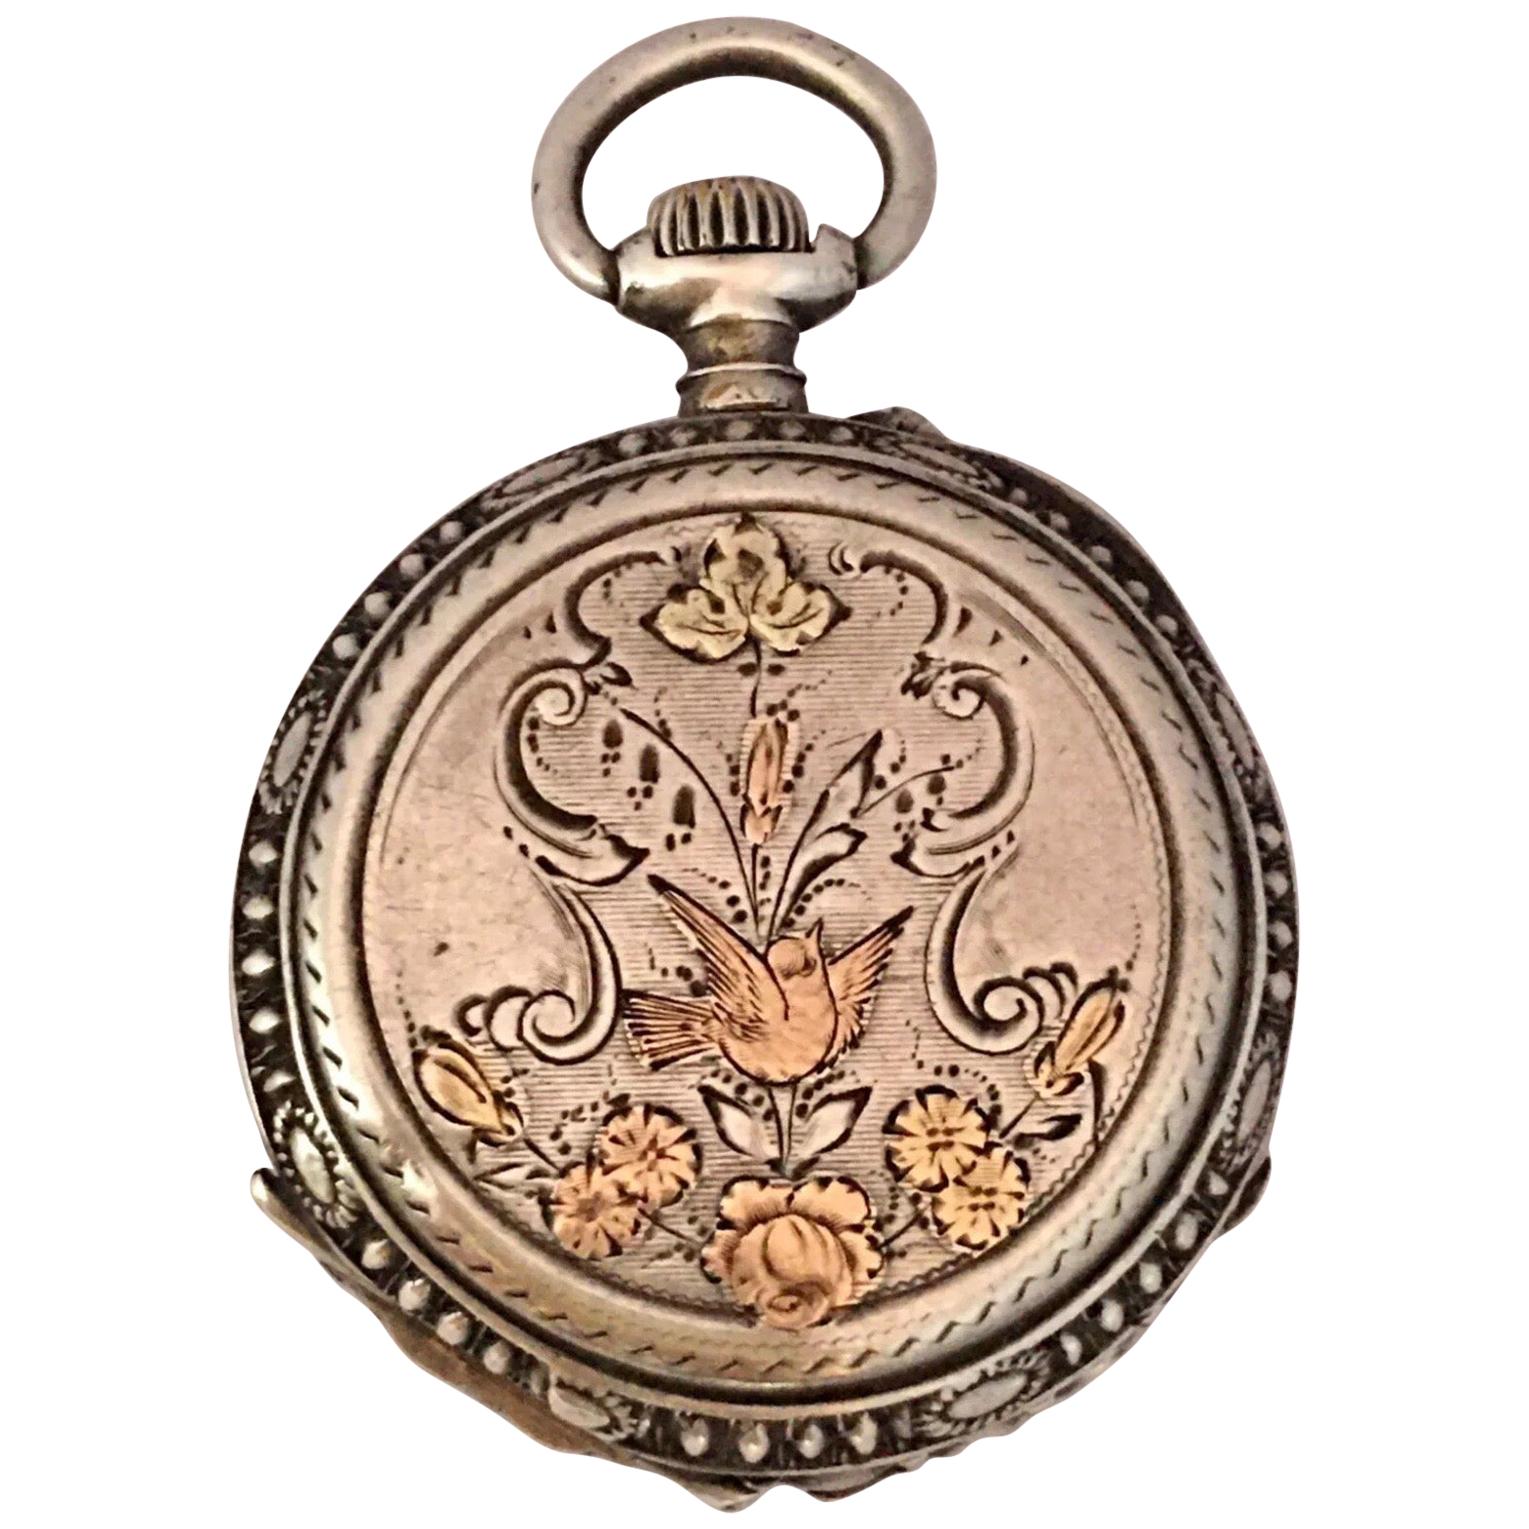 Antique Small Hand Winding Ornate Silver Fob / Pendant Watch For Sale